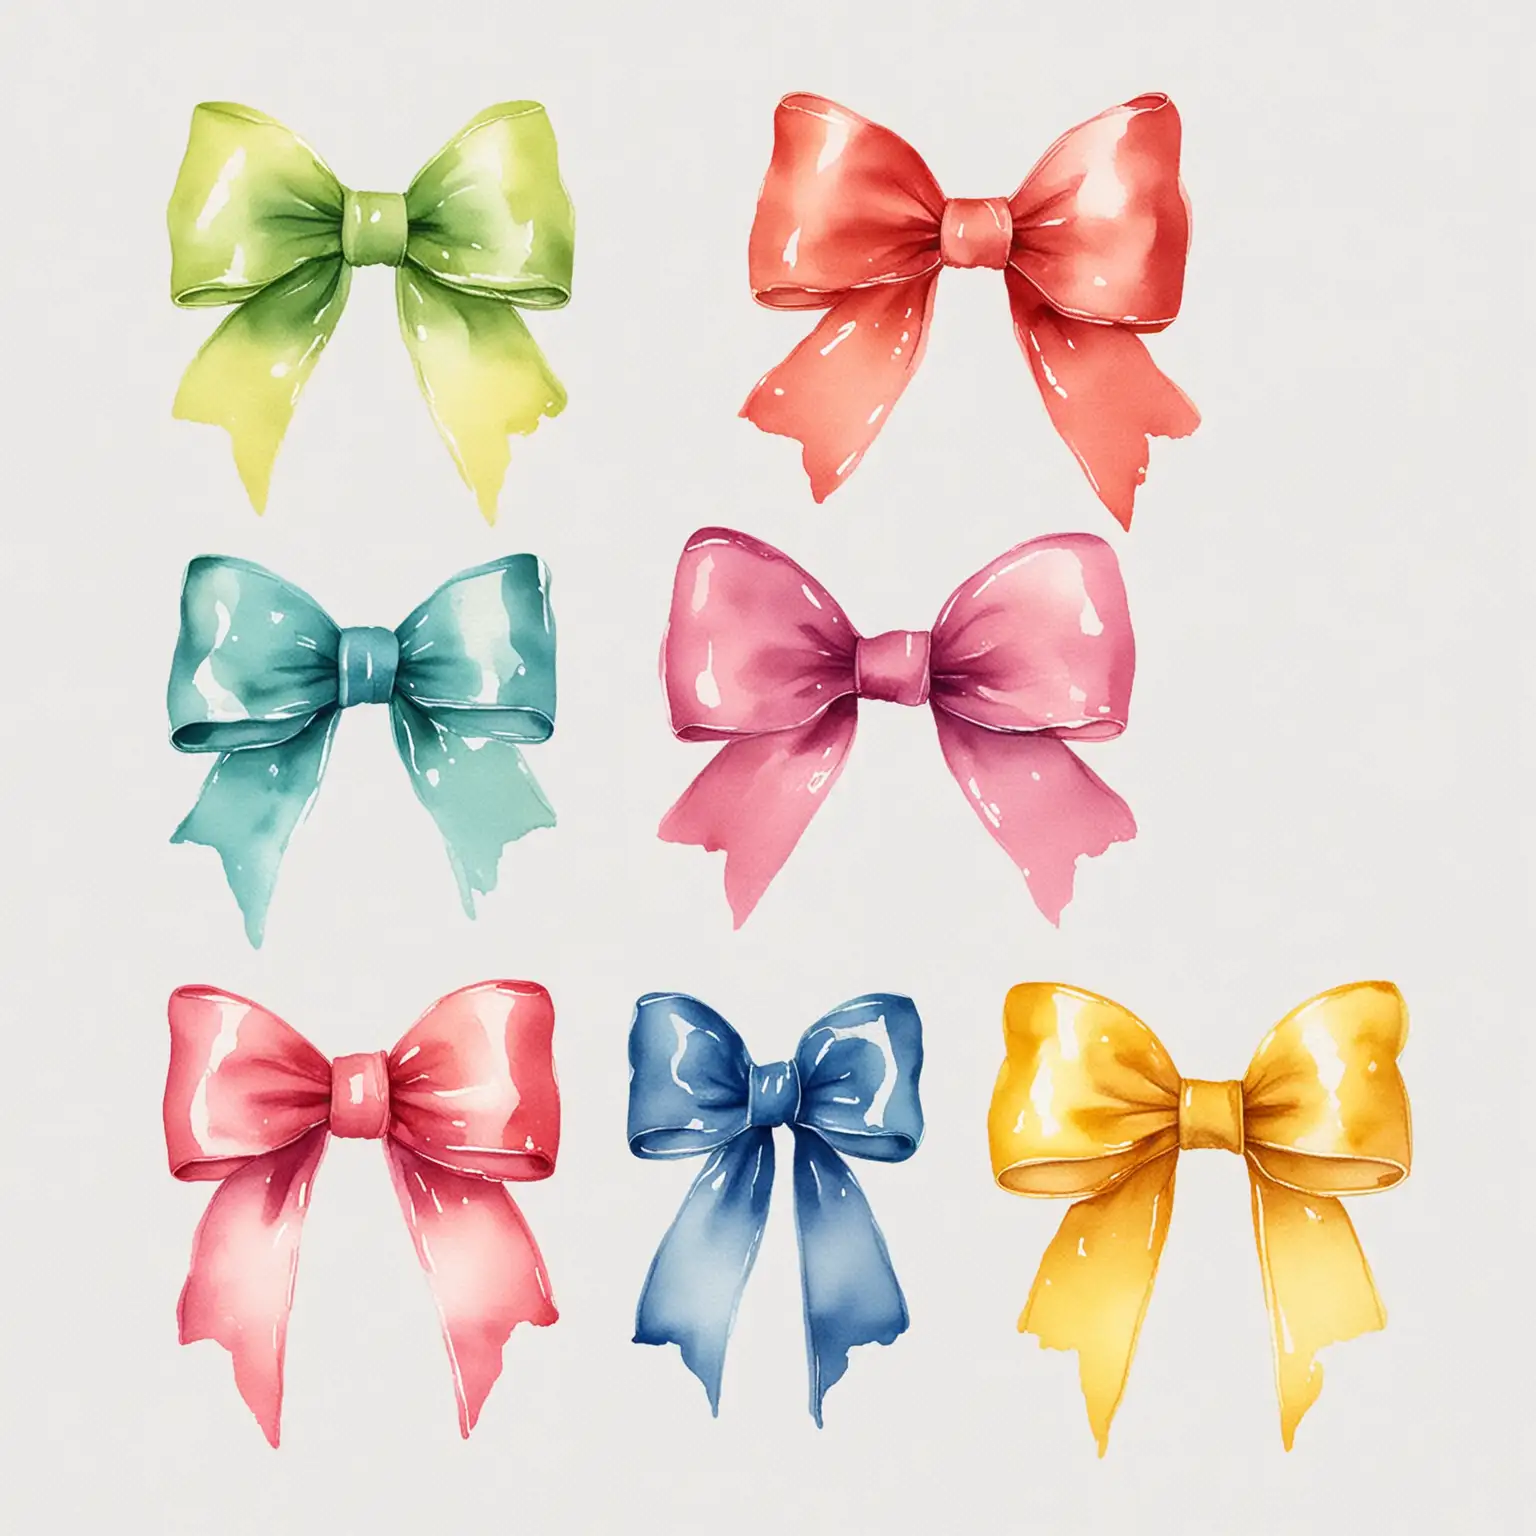 watercolour bow, clip art, isolated on white background, coloured bows in blue, red, green, pink, yellow, purple